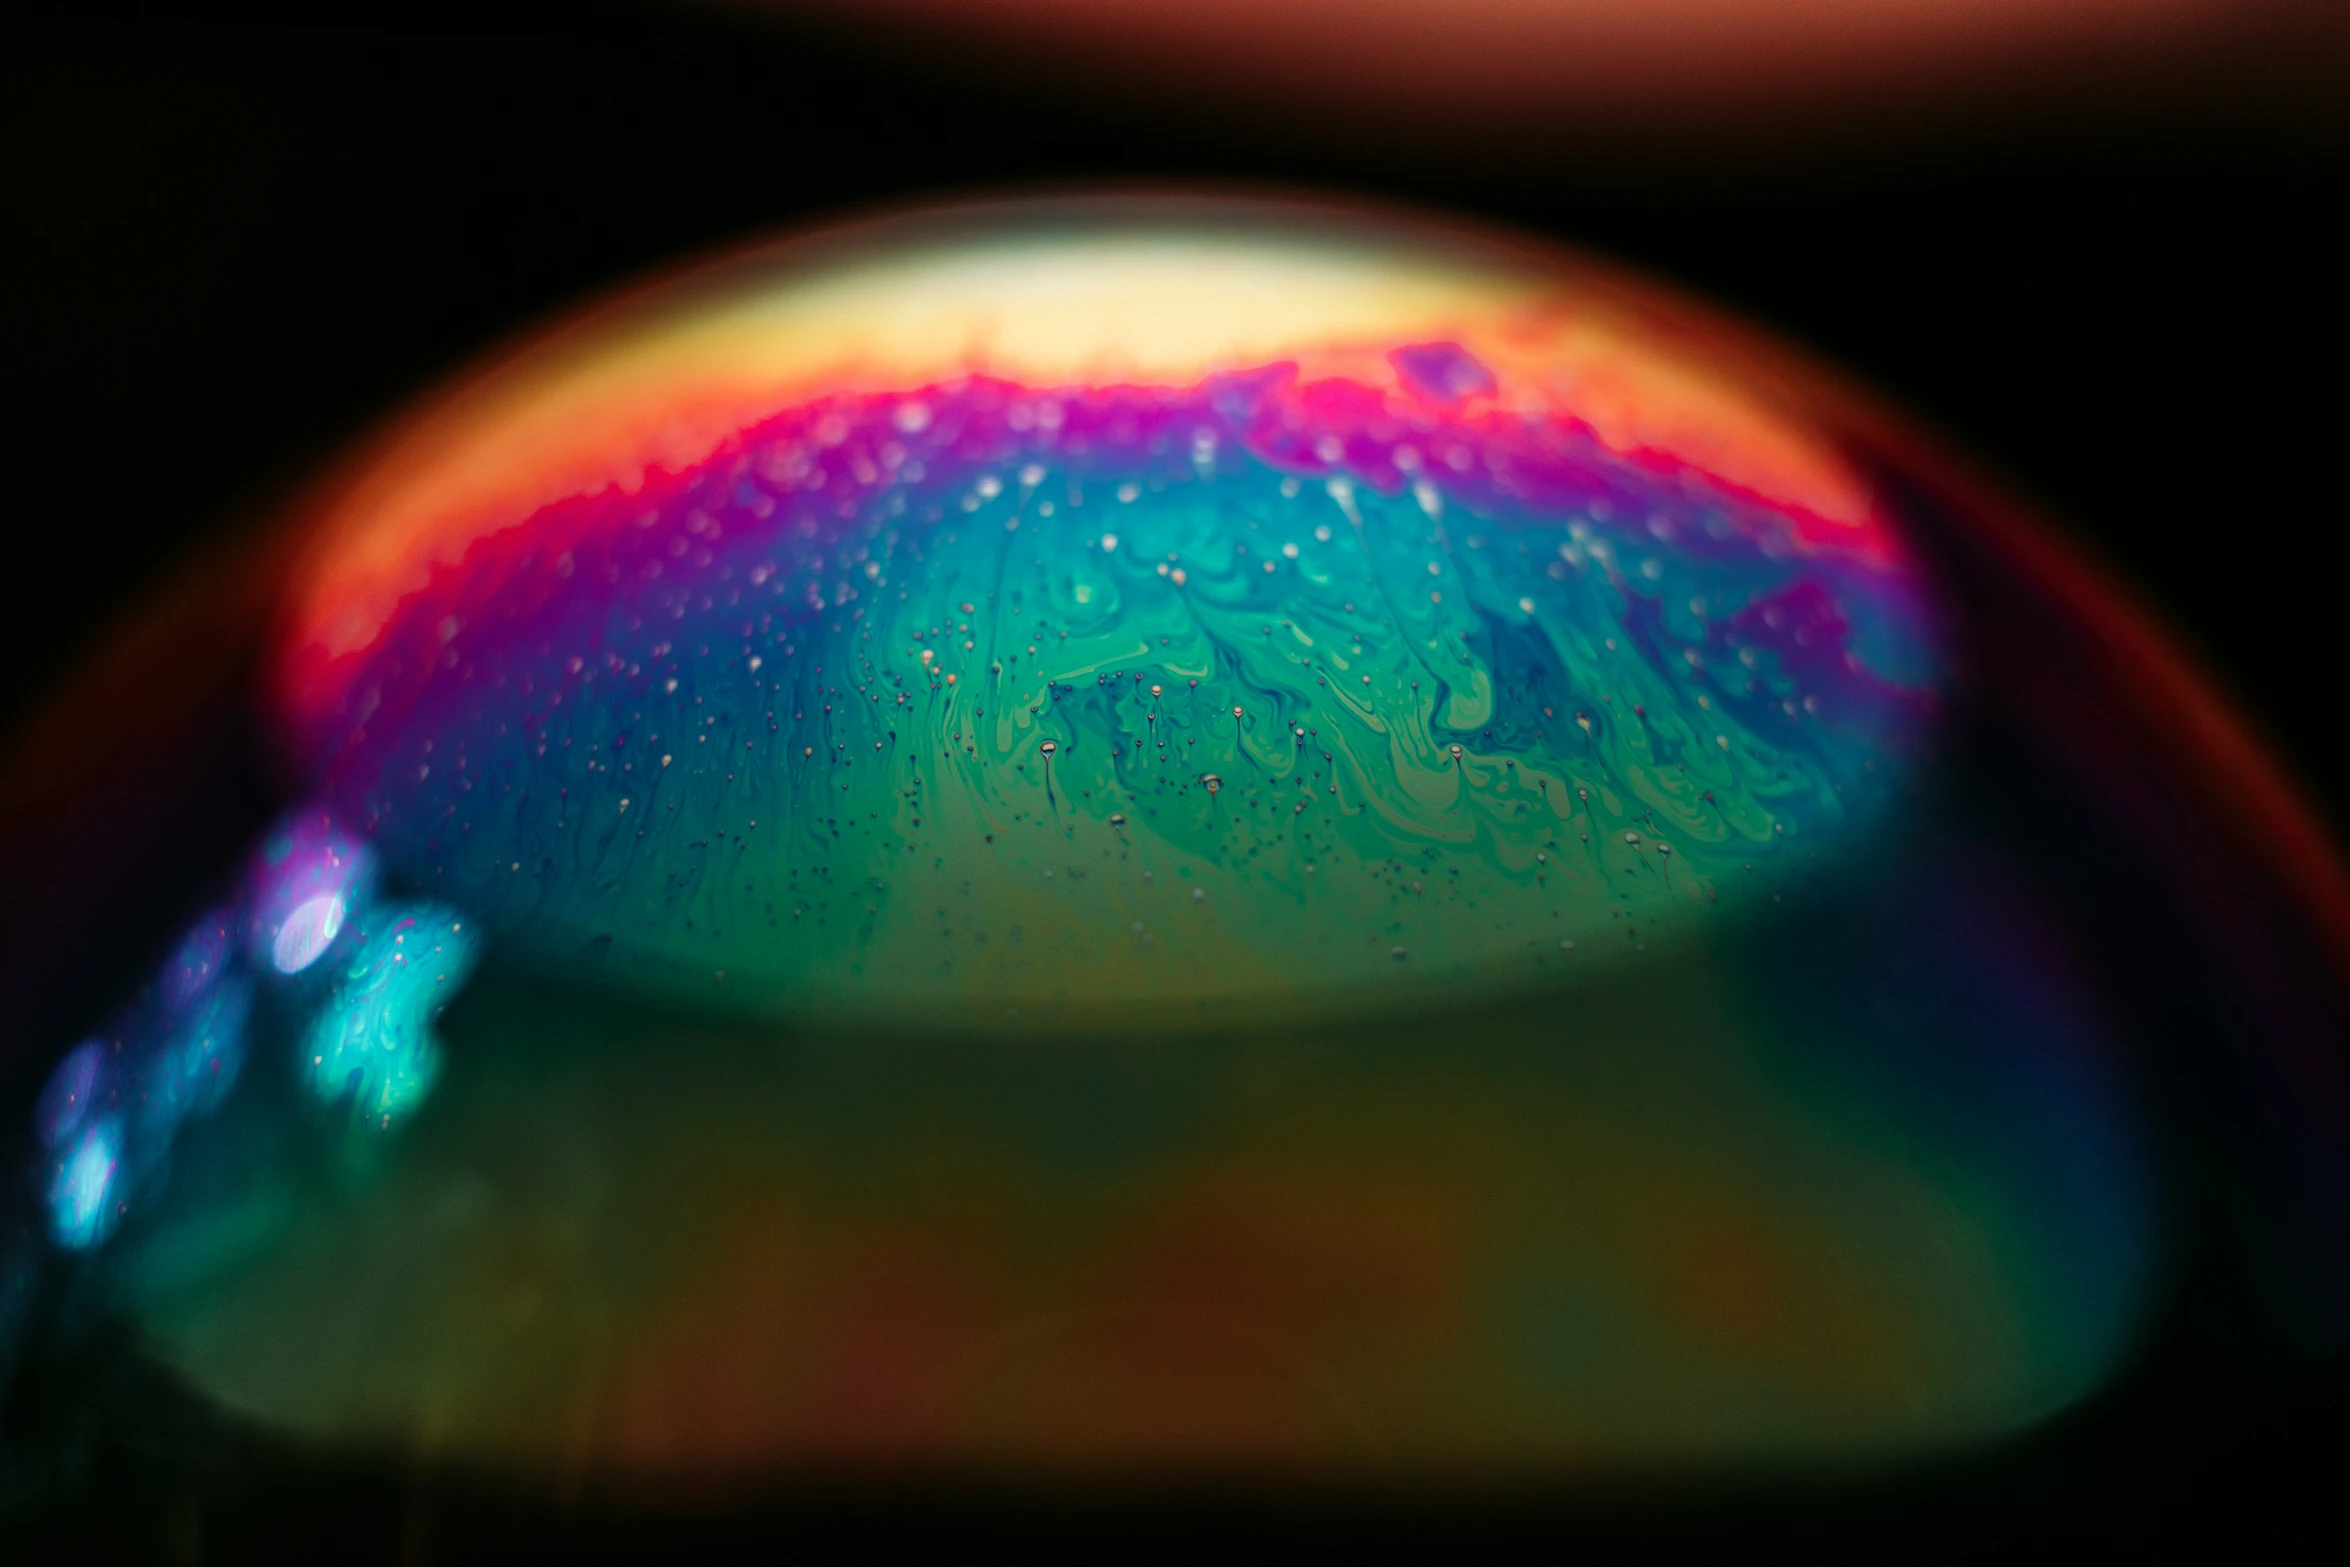 closeup image of a water droplet with rainbow colored bubbles